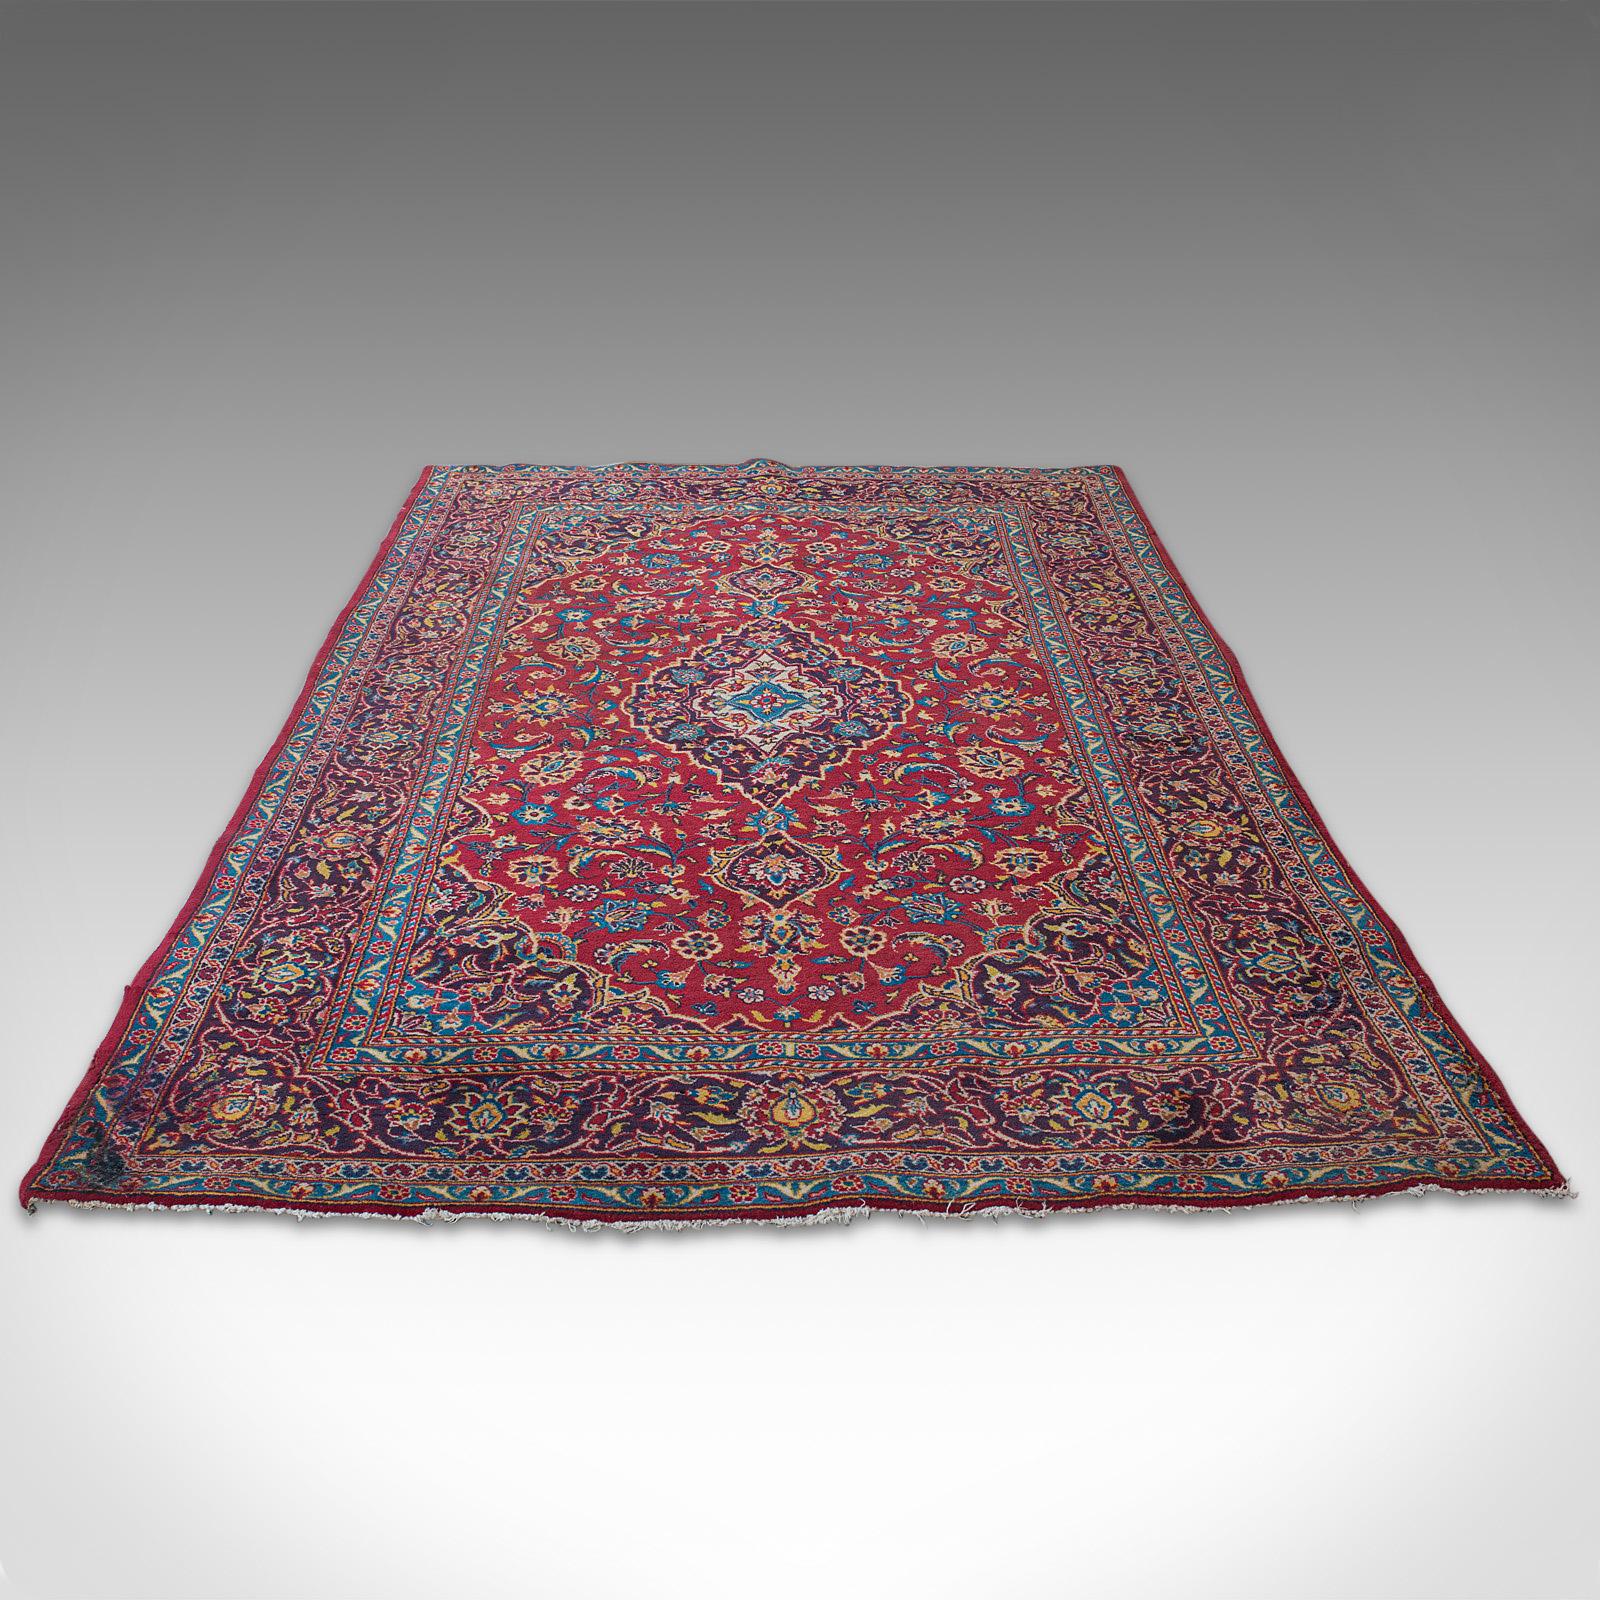 This is a quality vintage Tabriz rug. A North-west Persian, woven wool carpet ideal for the entrance hall or lounge, dating to the late 20th century, circa 1980.

Of versatile Dozar size at 144cm (56.75”) x 248cm (97.75”)
Displaying a desirable